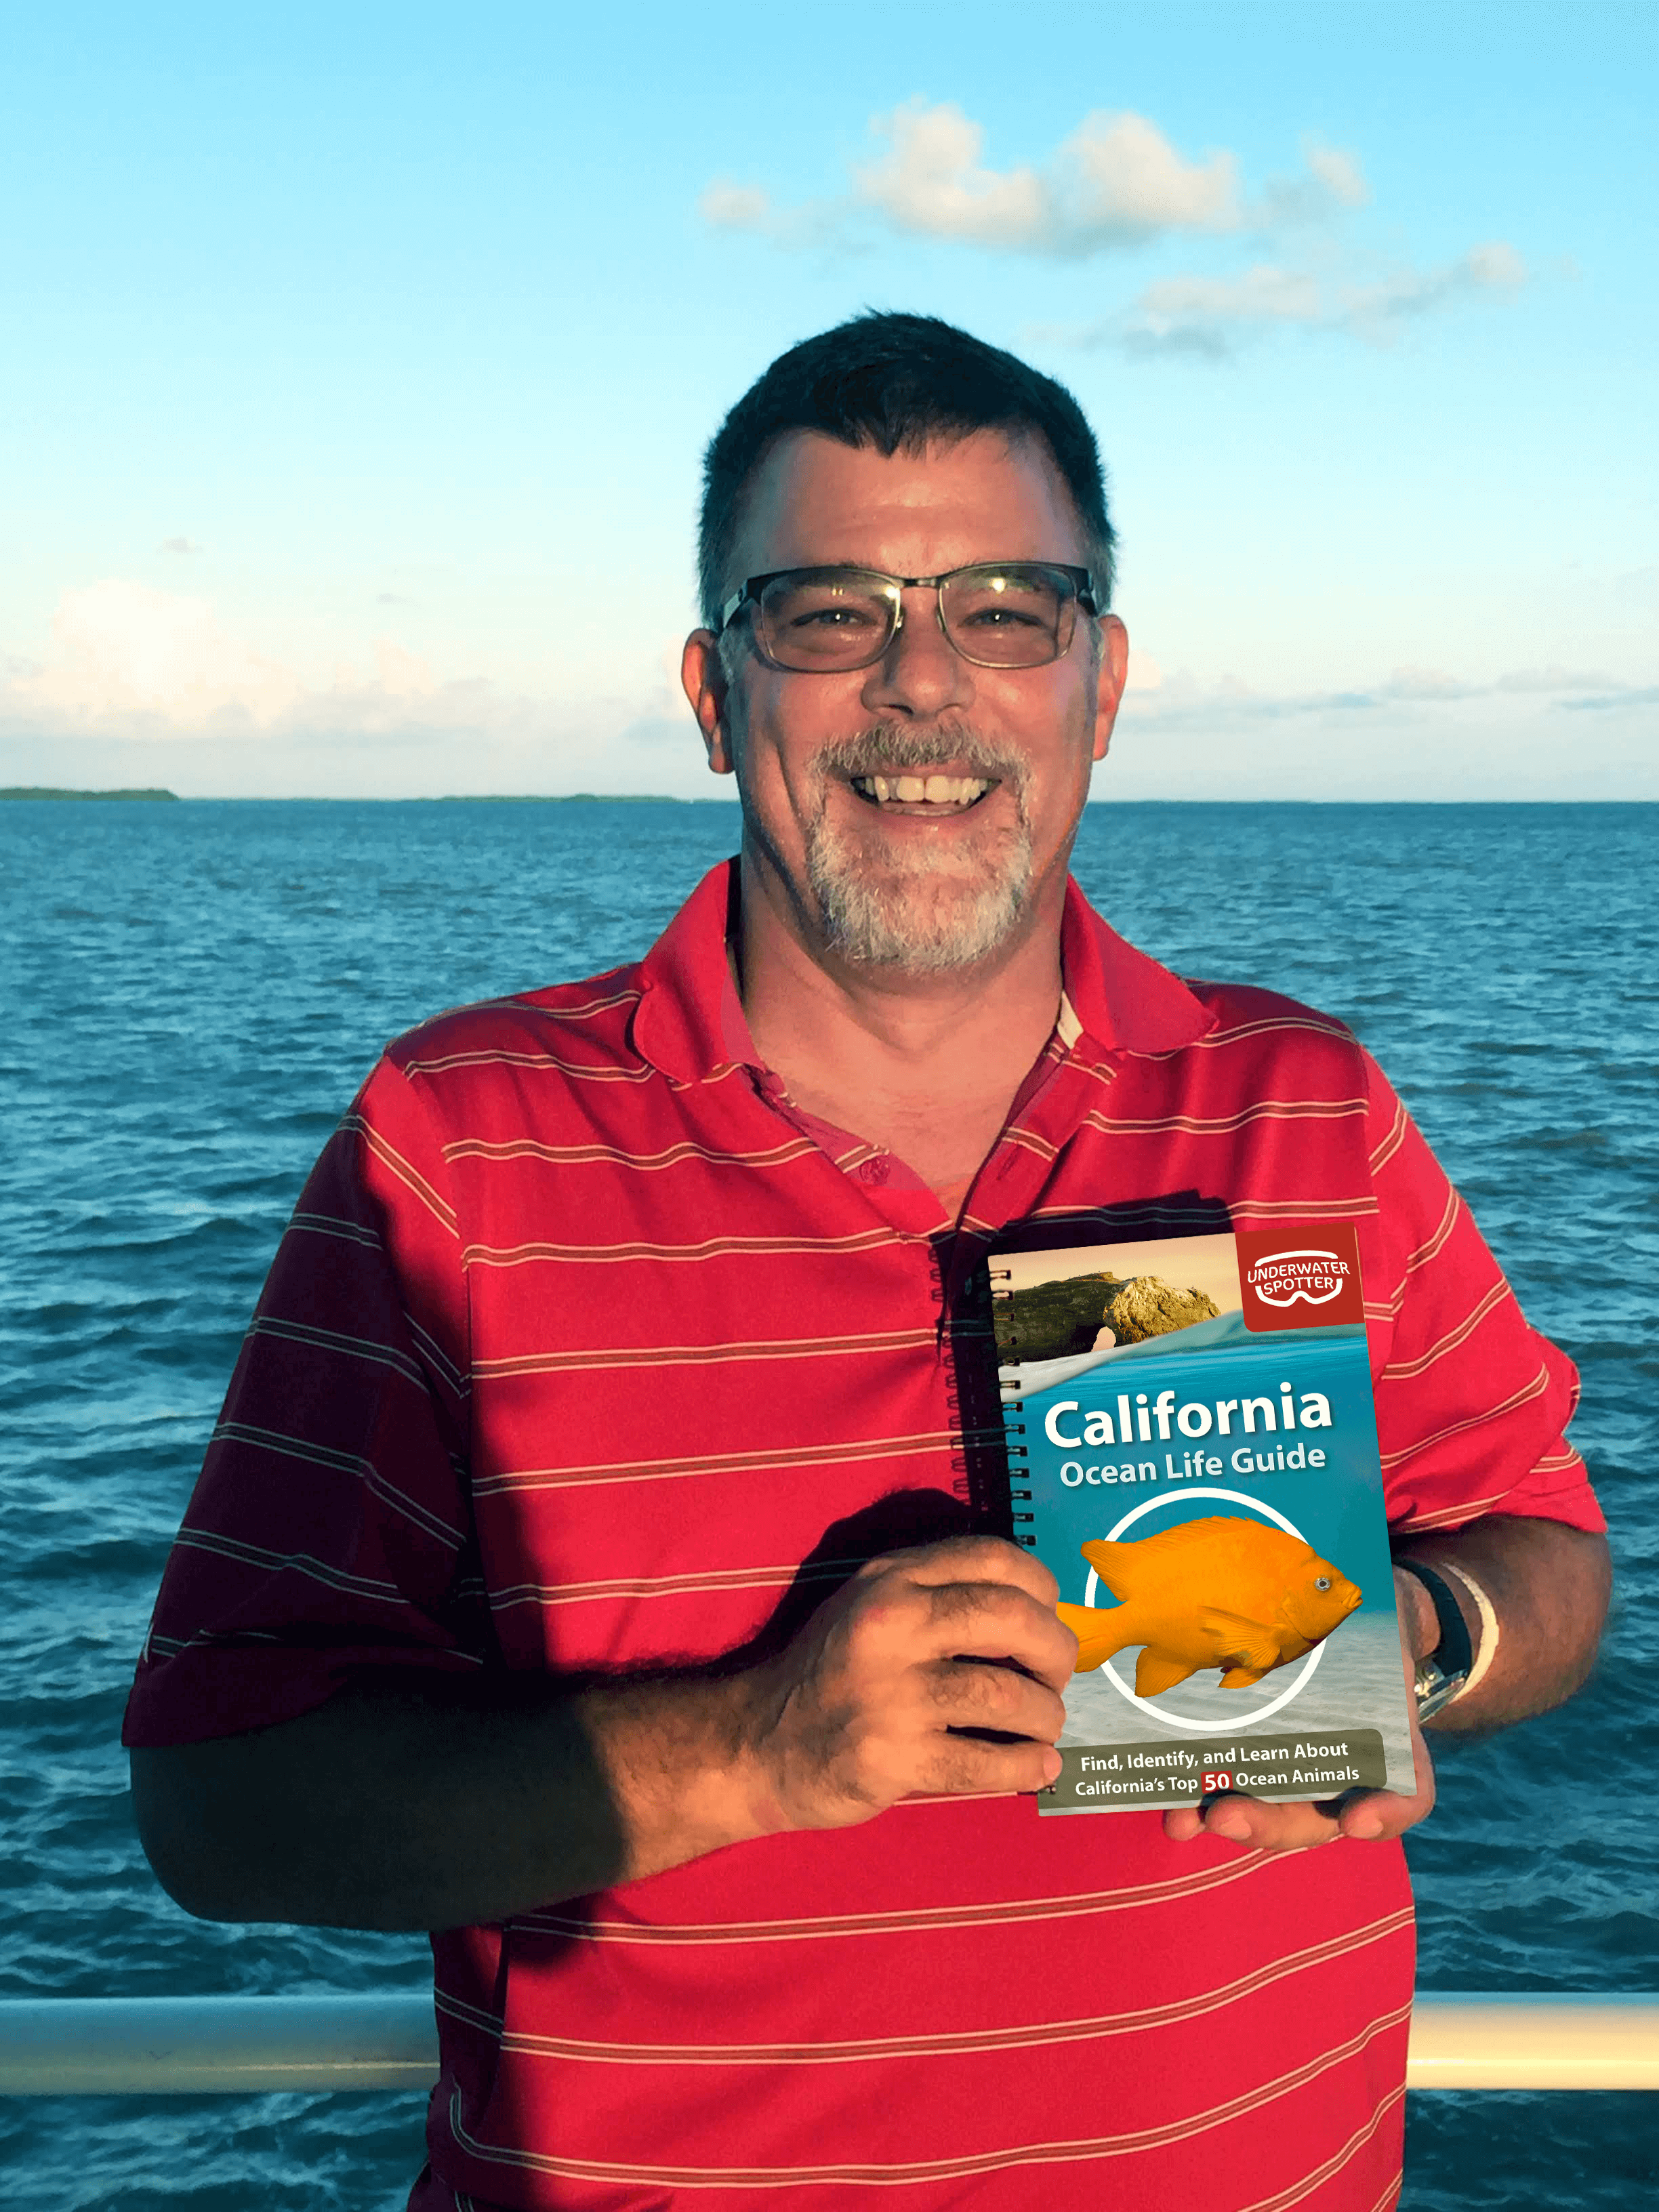 california underwater spotter and smiling male customer holding book